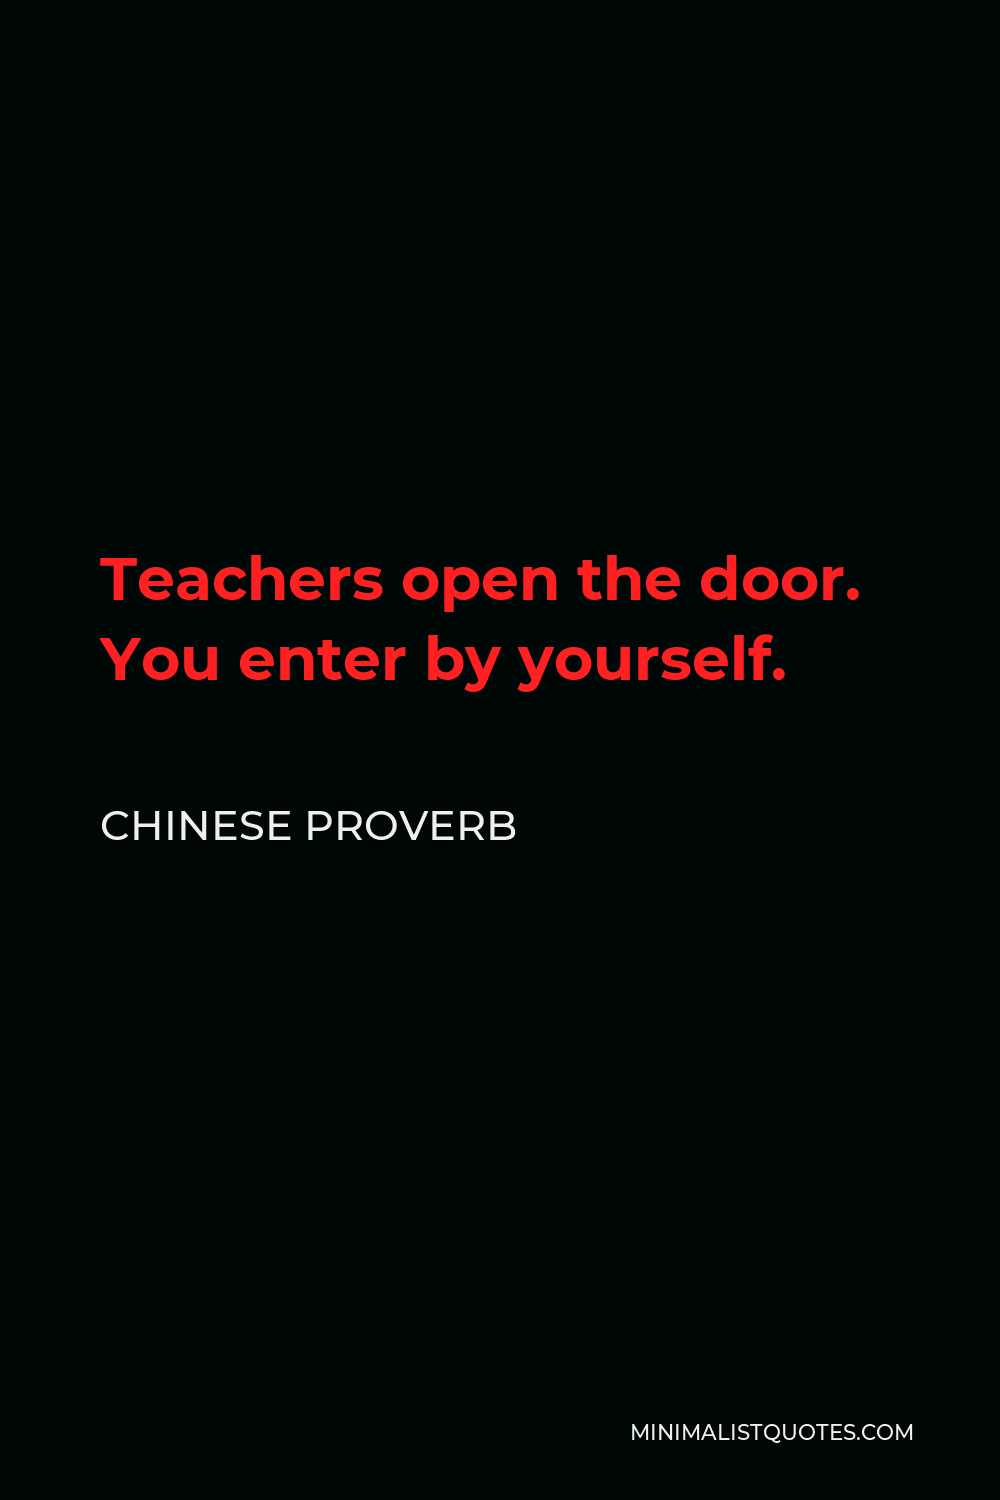 Chinese Proverb Quote - Teachers open the door. You enter by yourself.